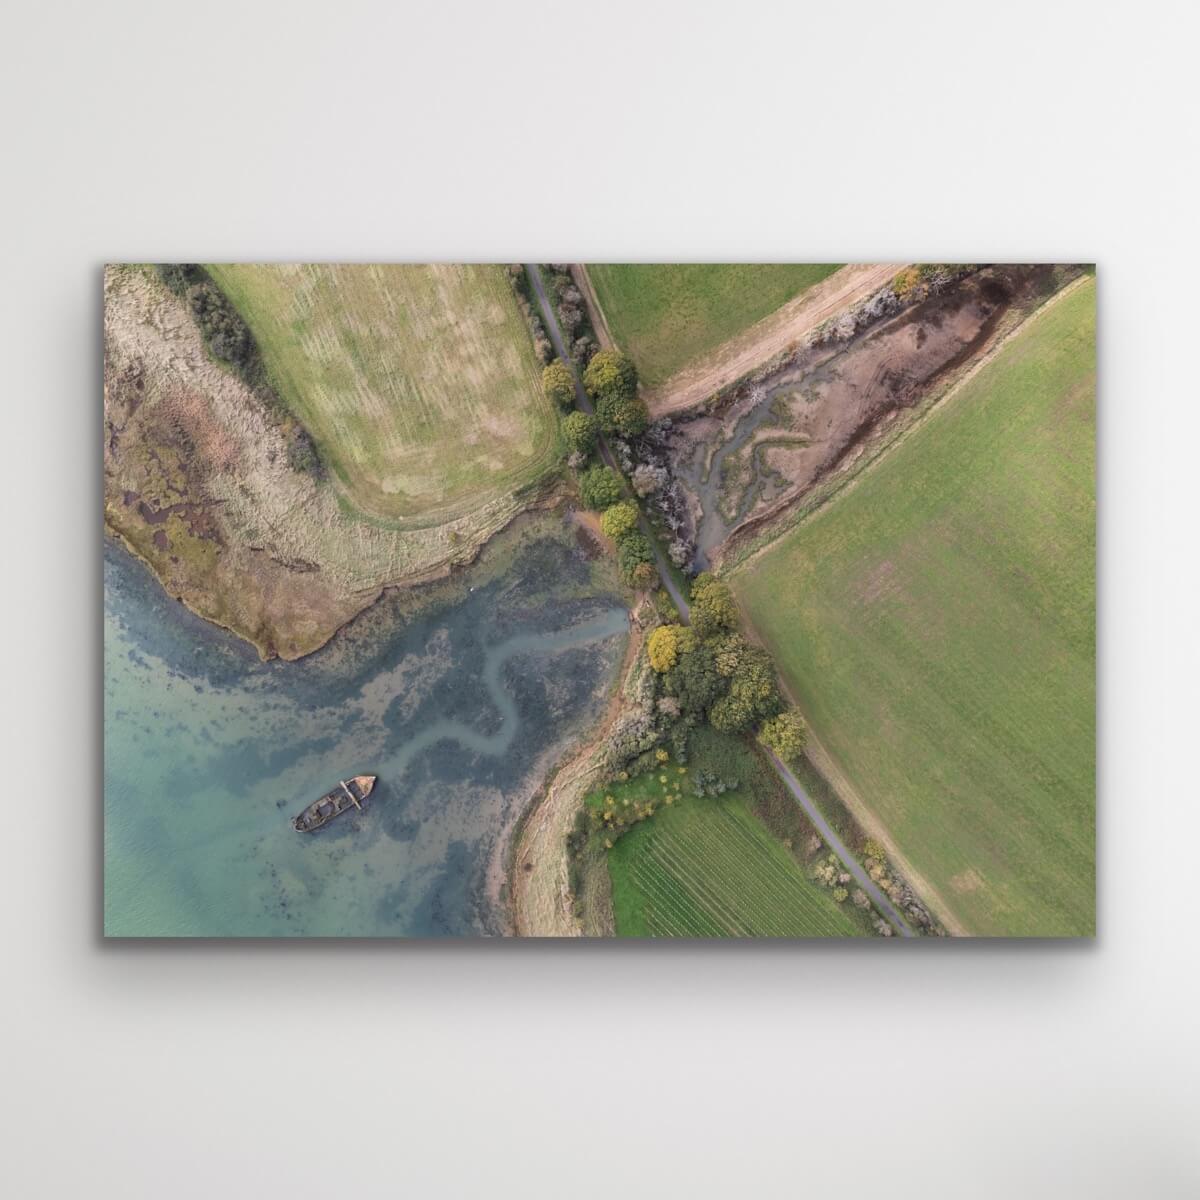 Yellowfin Wreck Medina River Aerial Photograph Gallery Isle of Wight Landscape Prints